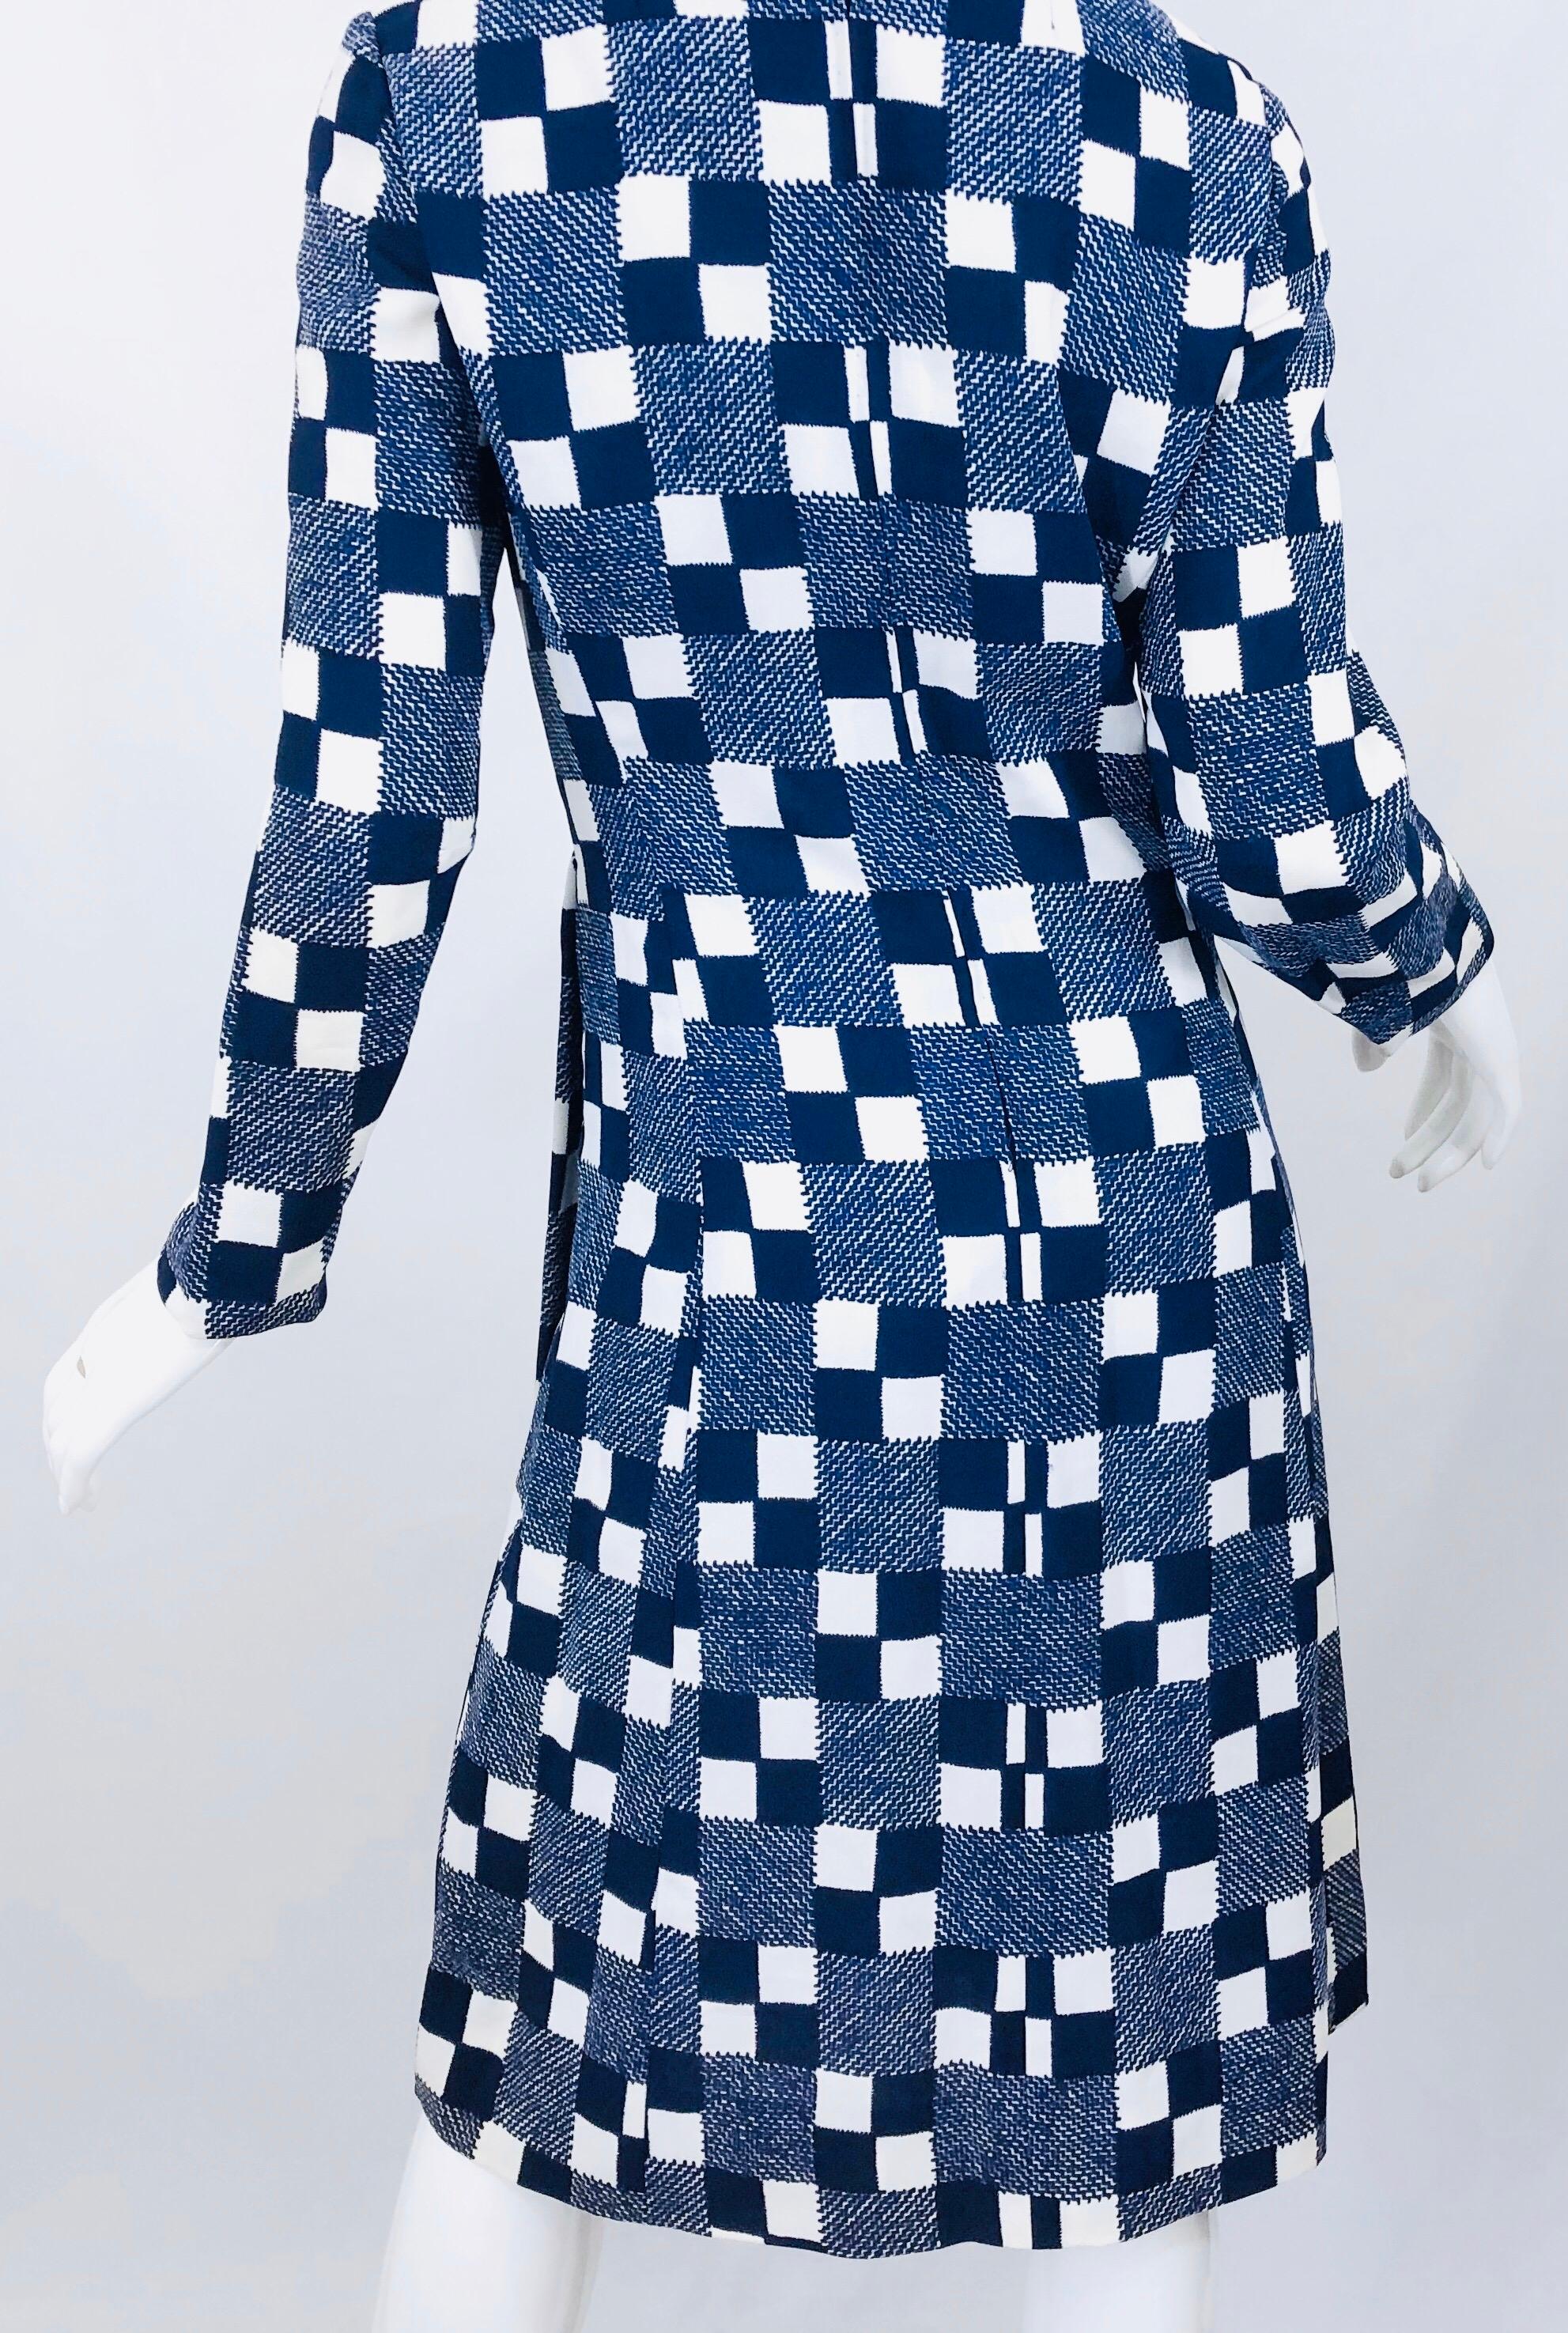 1960s Baron Peters Navy Blue + White Checkered Rayon Crepe Vintage 60s Dress For Sale 1